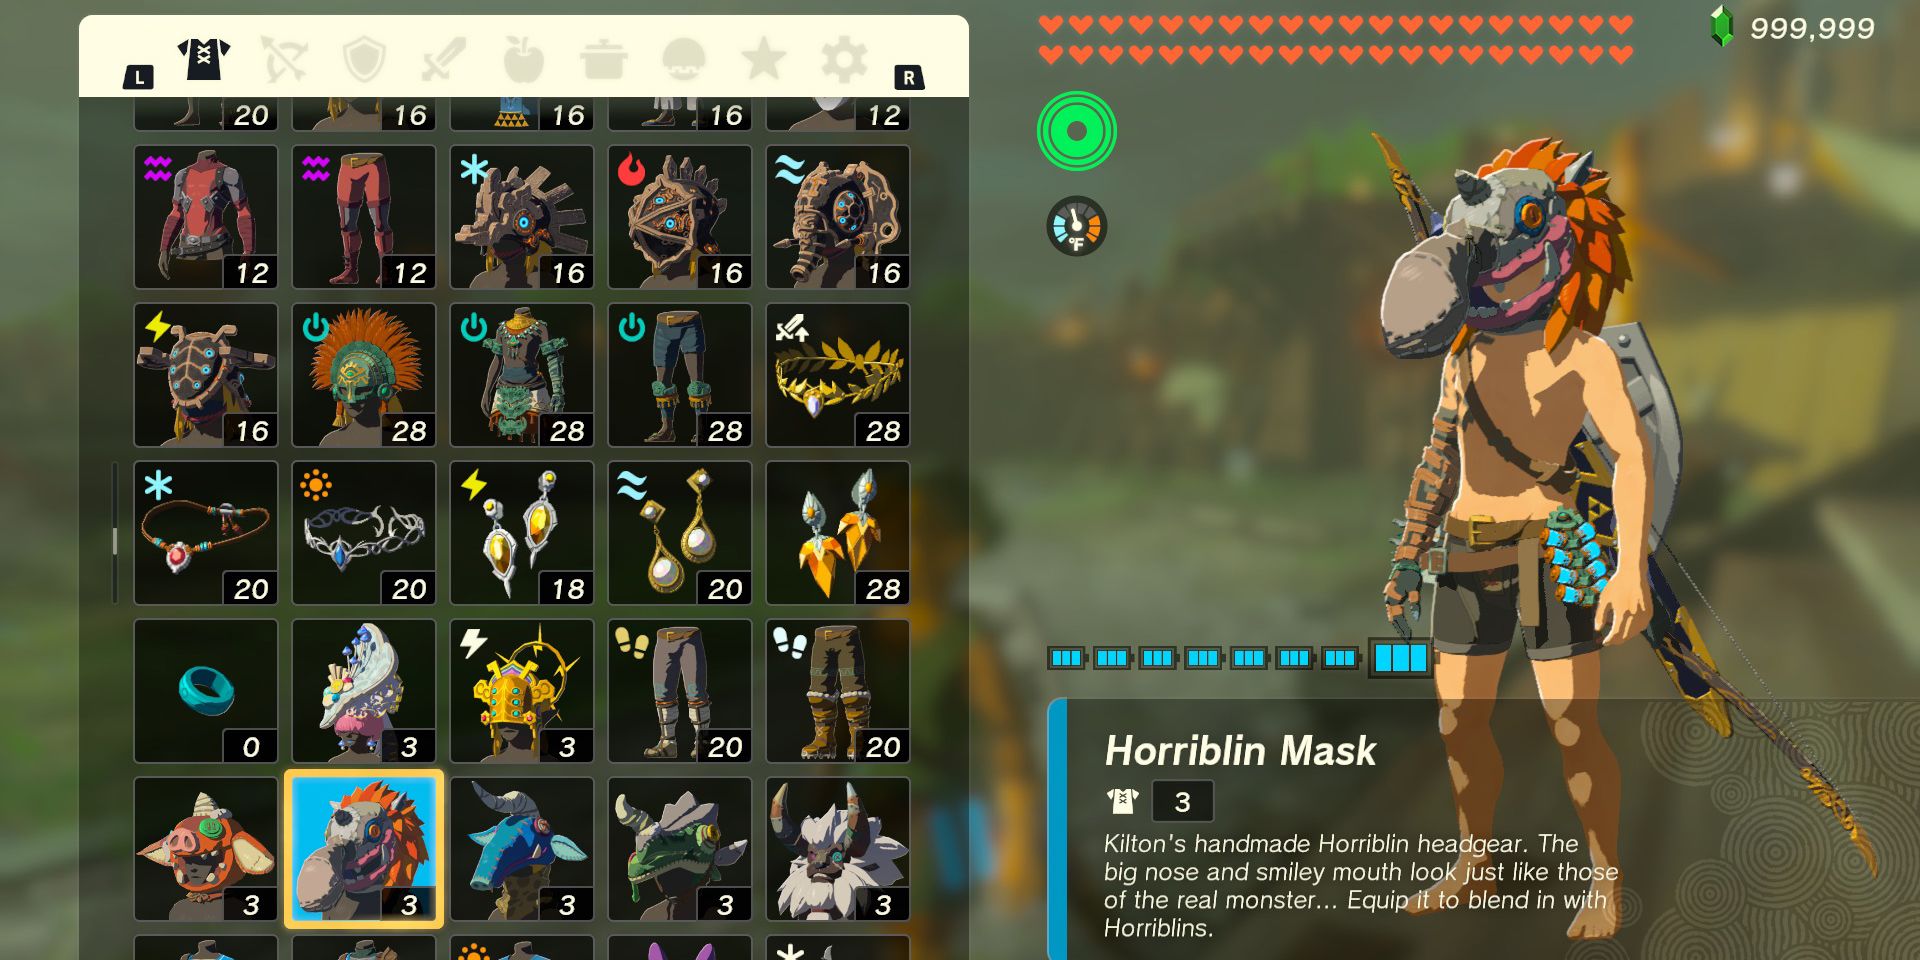 The Horriblin mask armor piece in The Legend of Zelda: Tears of the Kingdom